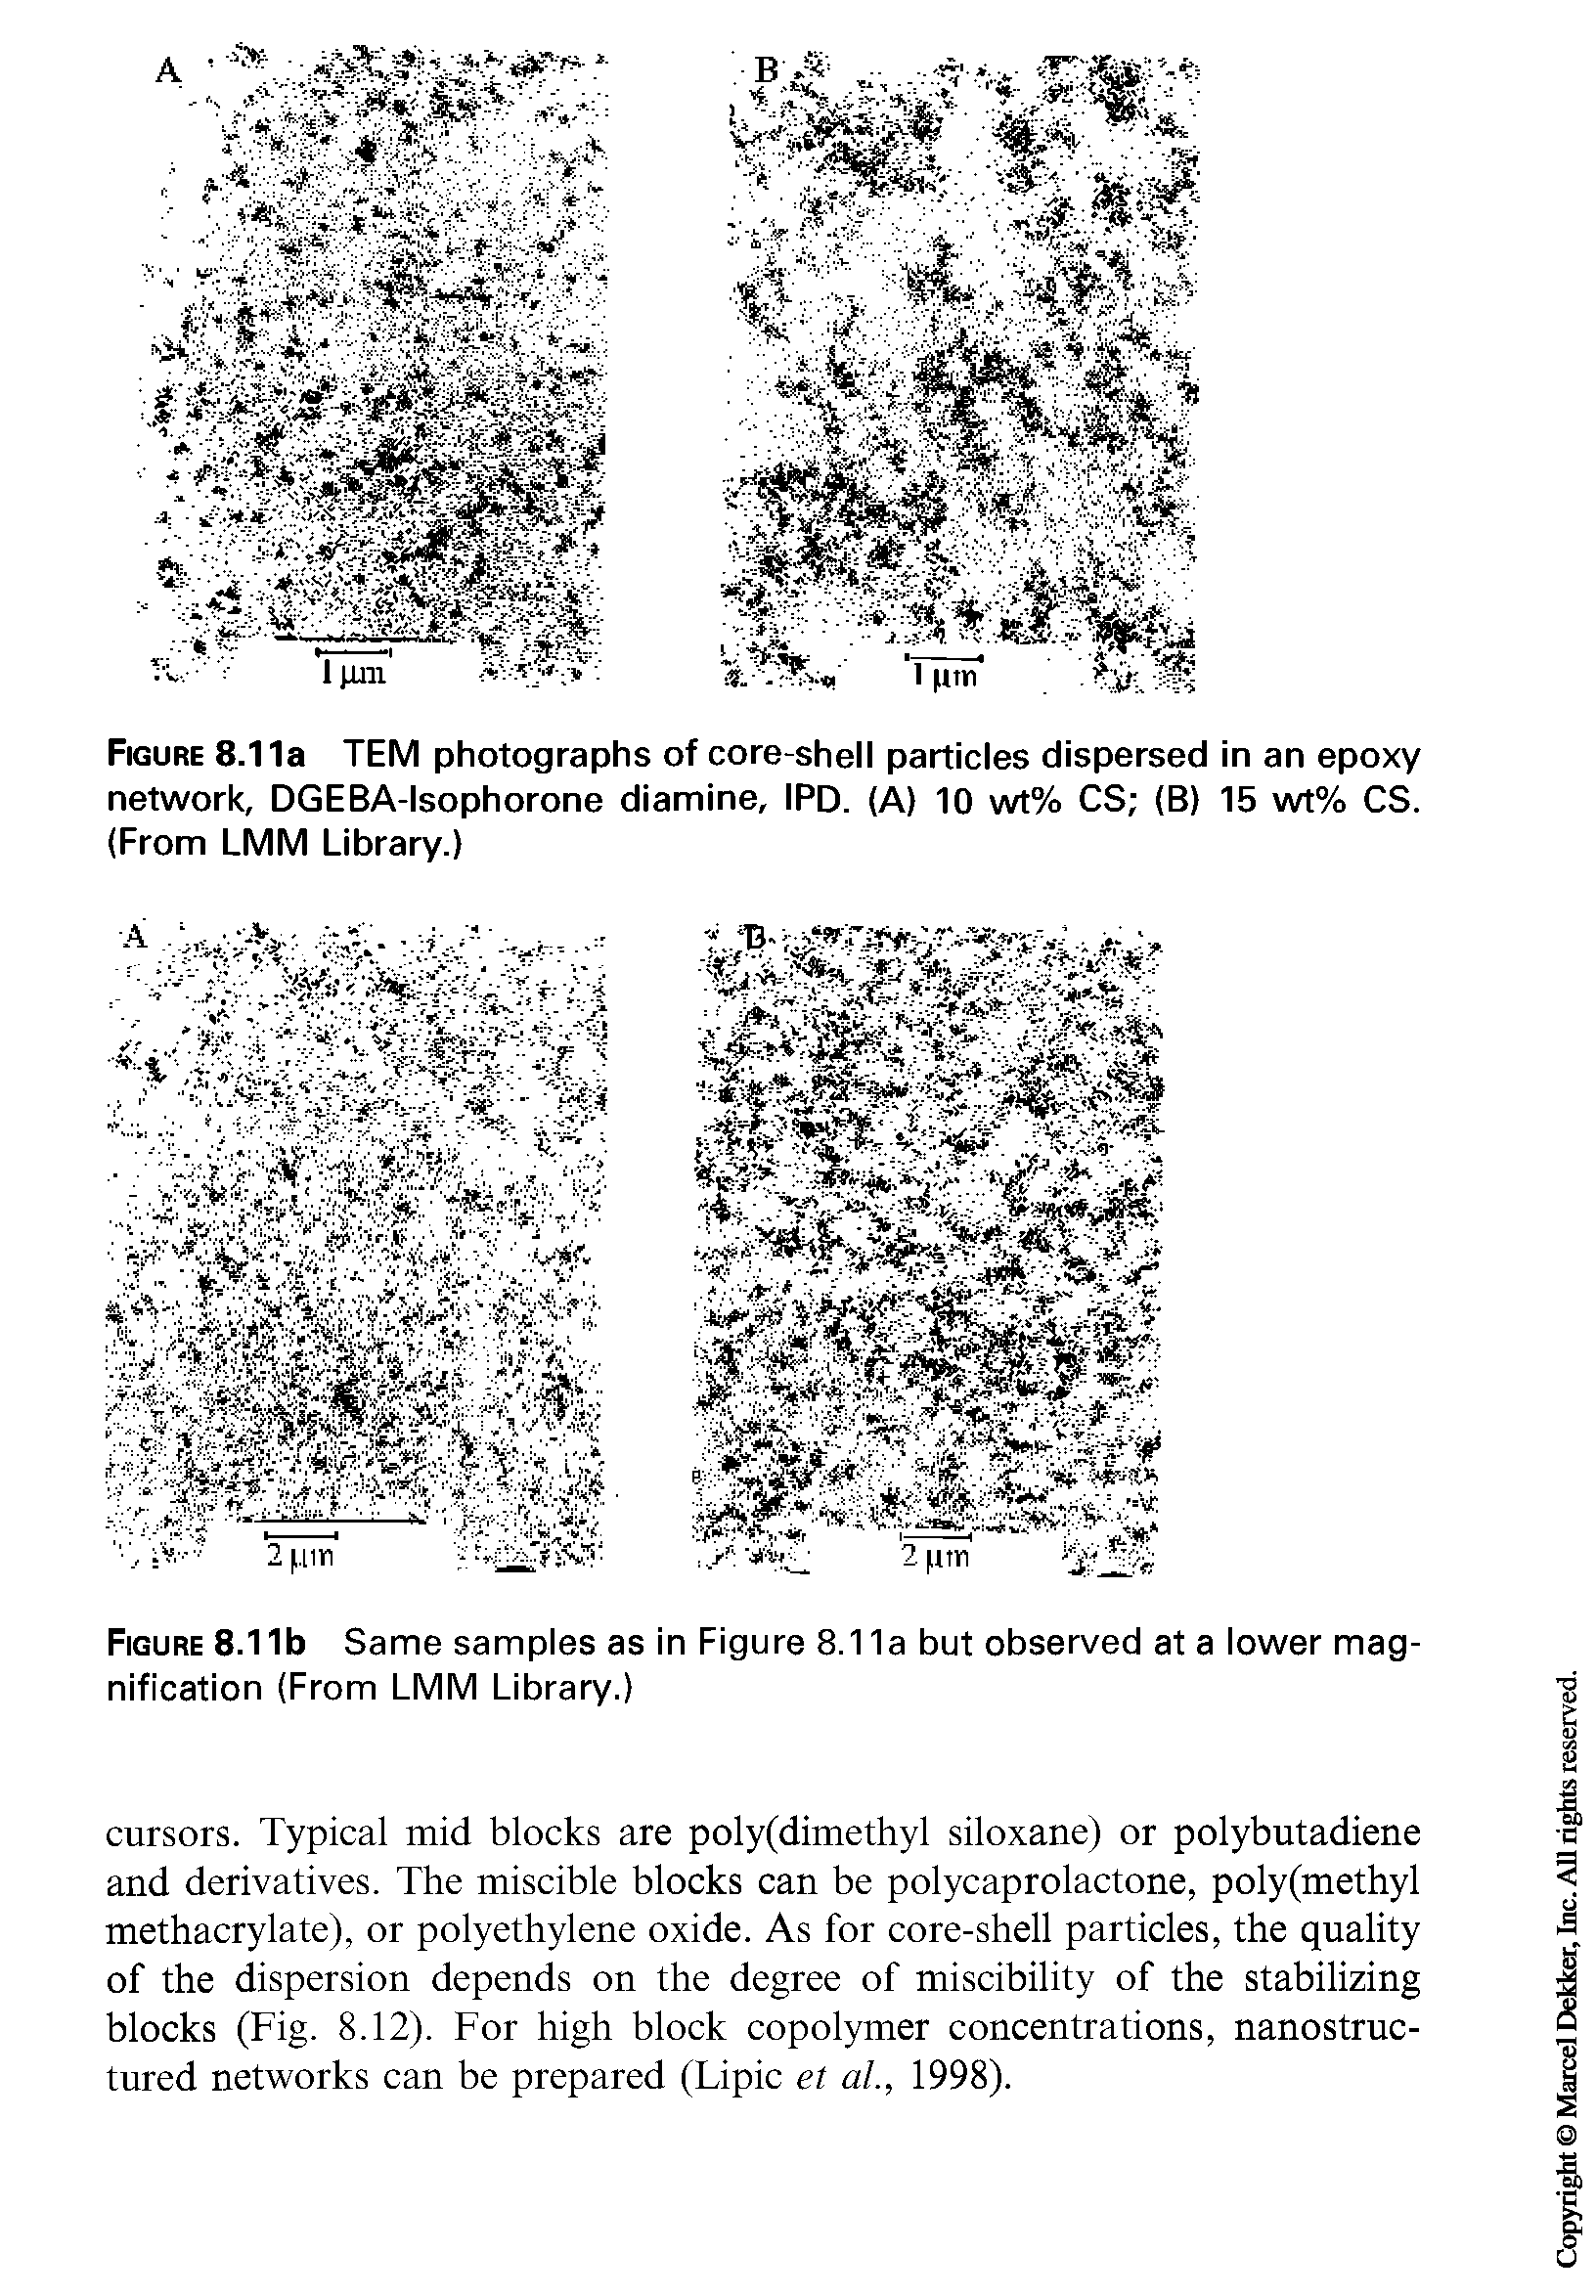 Figure 8.11a TEM photographs of core-shell particles dispersed in an epoxy network, DGEBA-lsophorone diamine, IPD. (A) 10 wt% CS (B) 15 wt% CS. (From LMM Library.)...